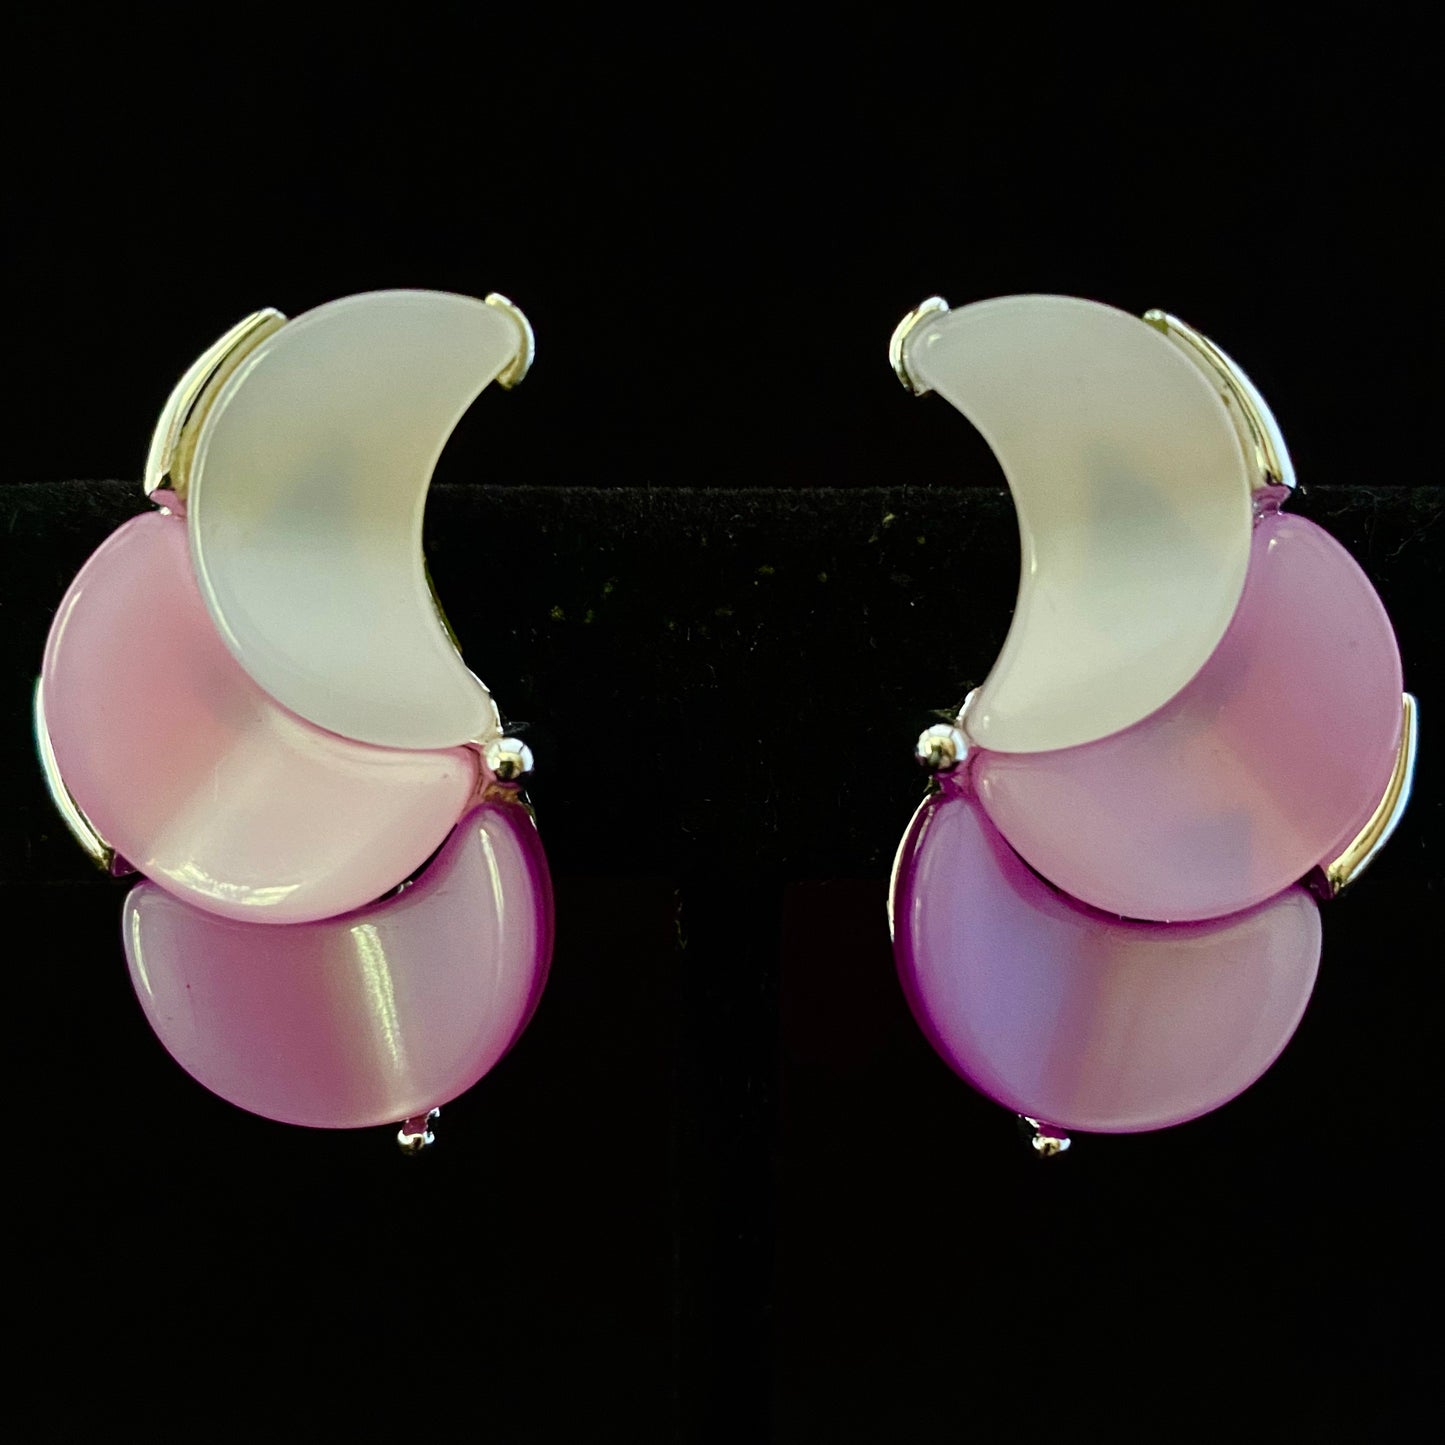 1960s Lisner Thermoset Crescent Earrings - Retro Kandy Vintage